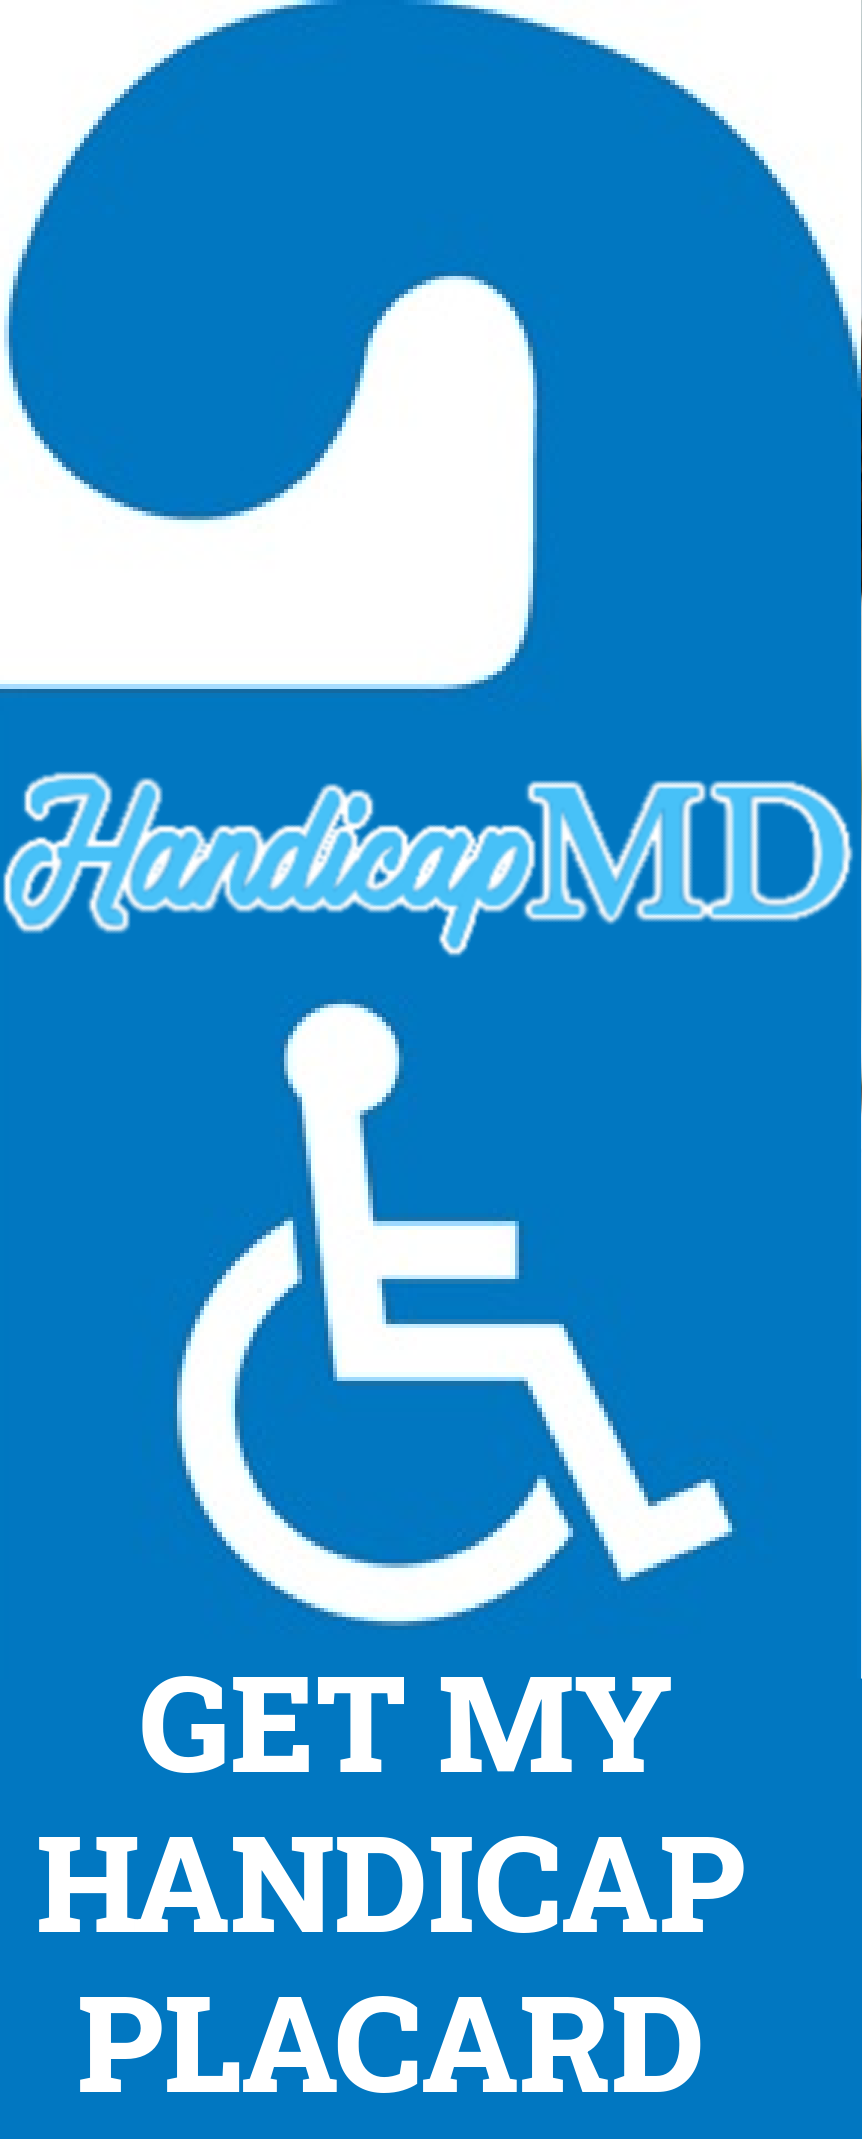 Tips for Displaying Your Handicap Placard Correctly in Maryland